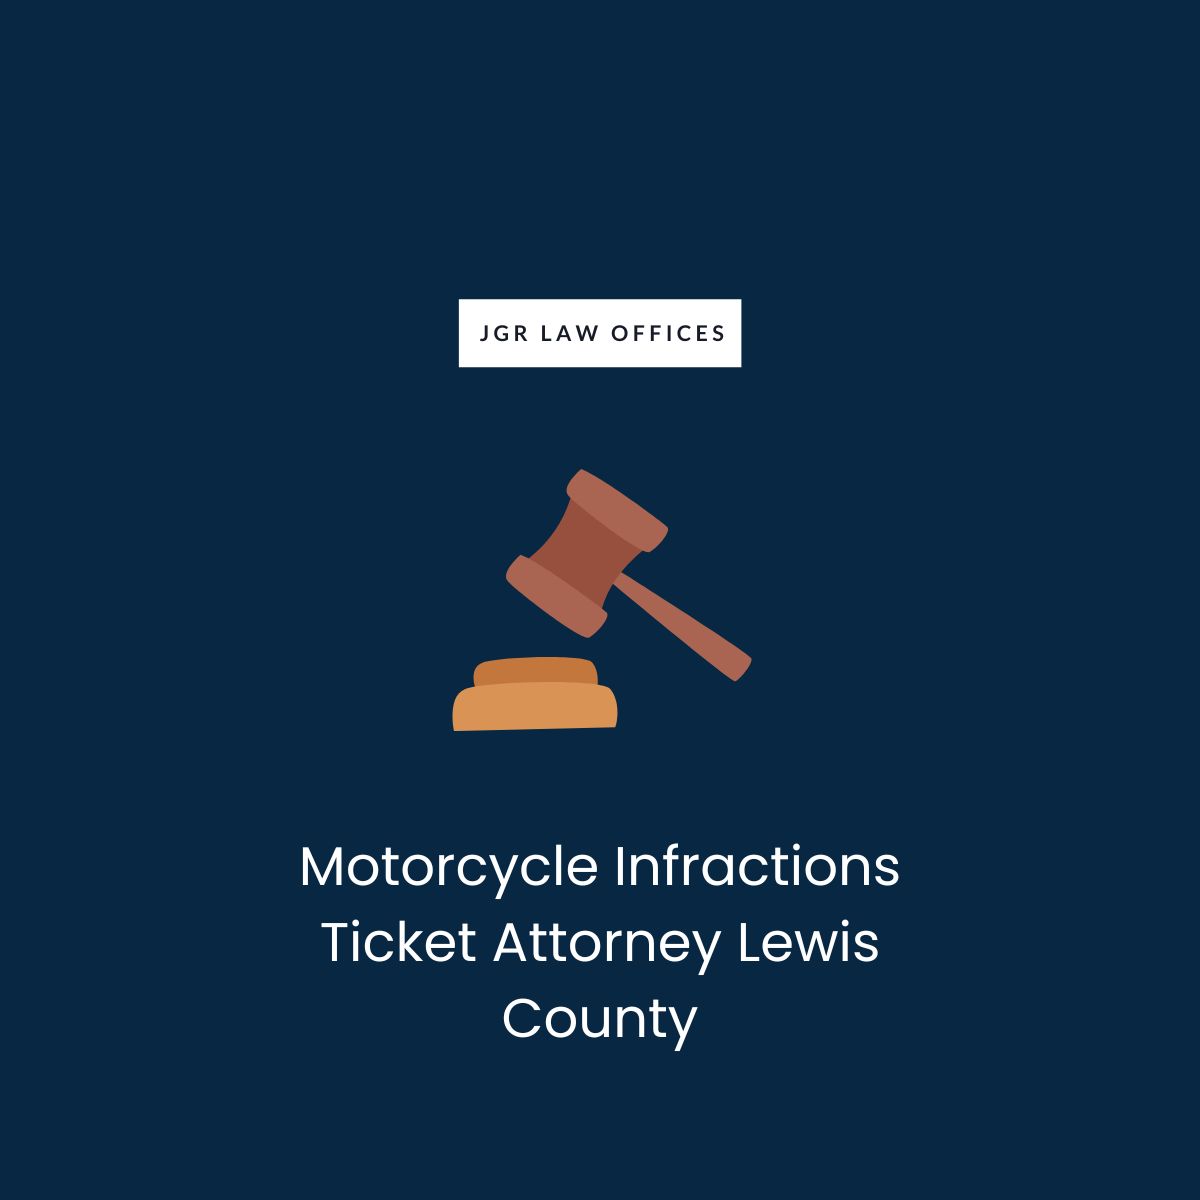 Motorcycle Infractions Ticket Attorney Lewis County